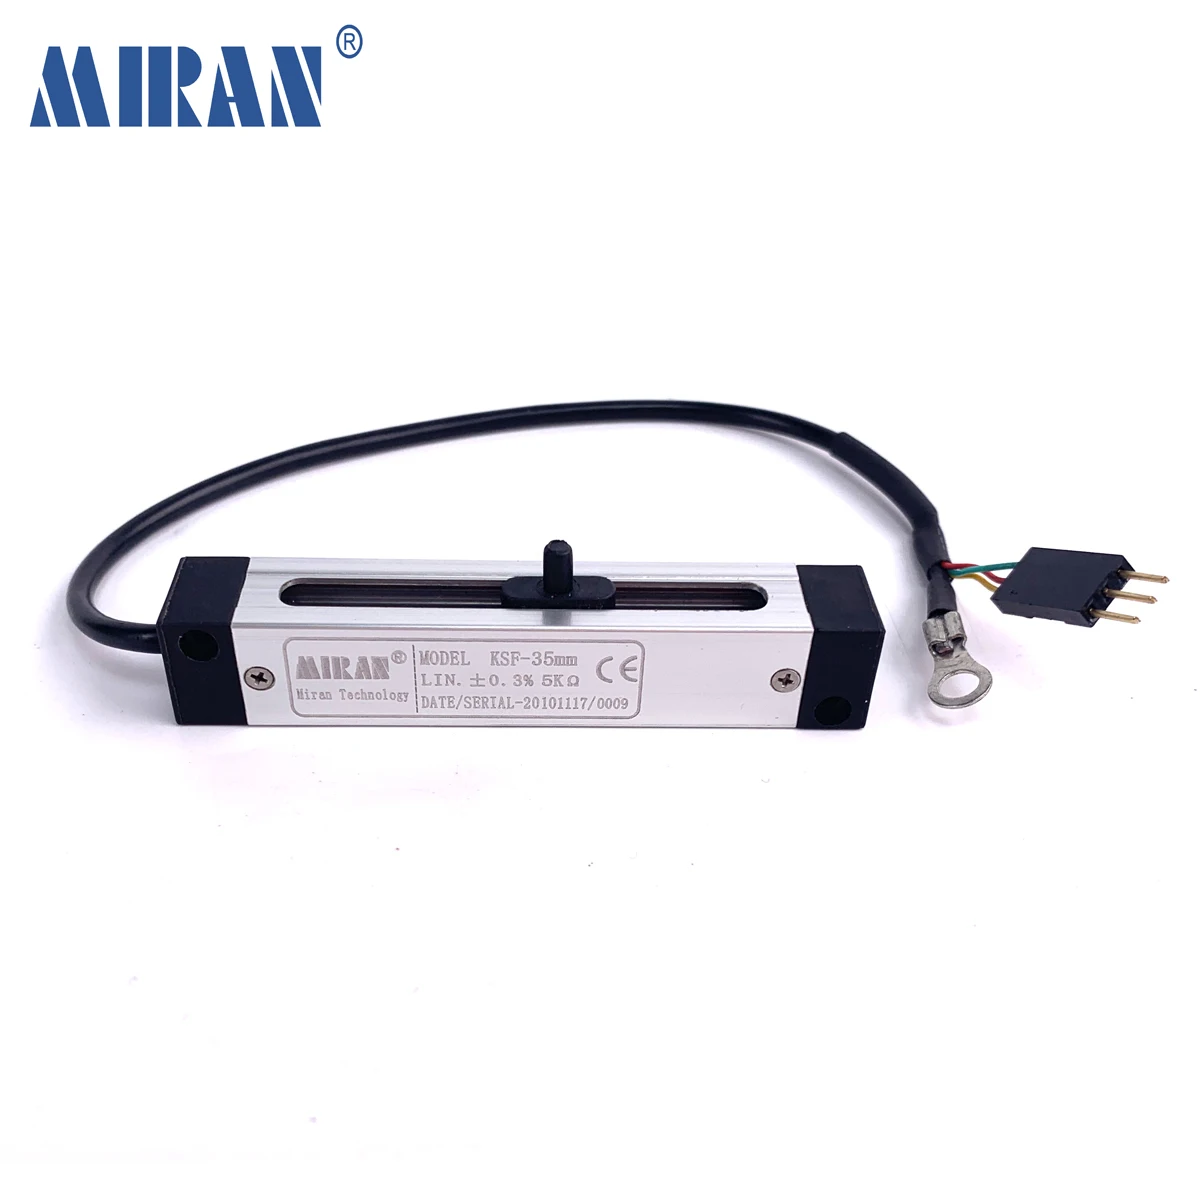 MIRAN KSF Stroke 5-120mm Miniature Slider Linear Position Sensor Electronic Scale/Ruler for Printing Equipment and Valve Control